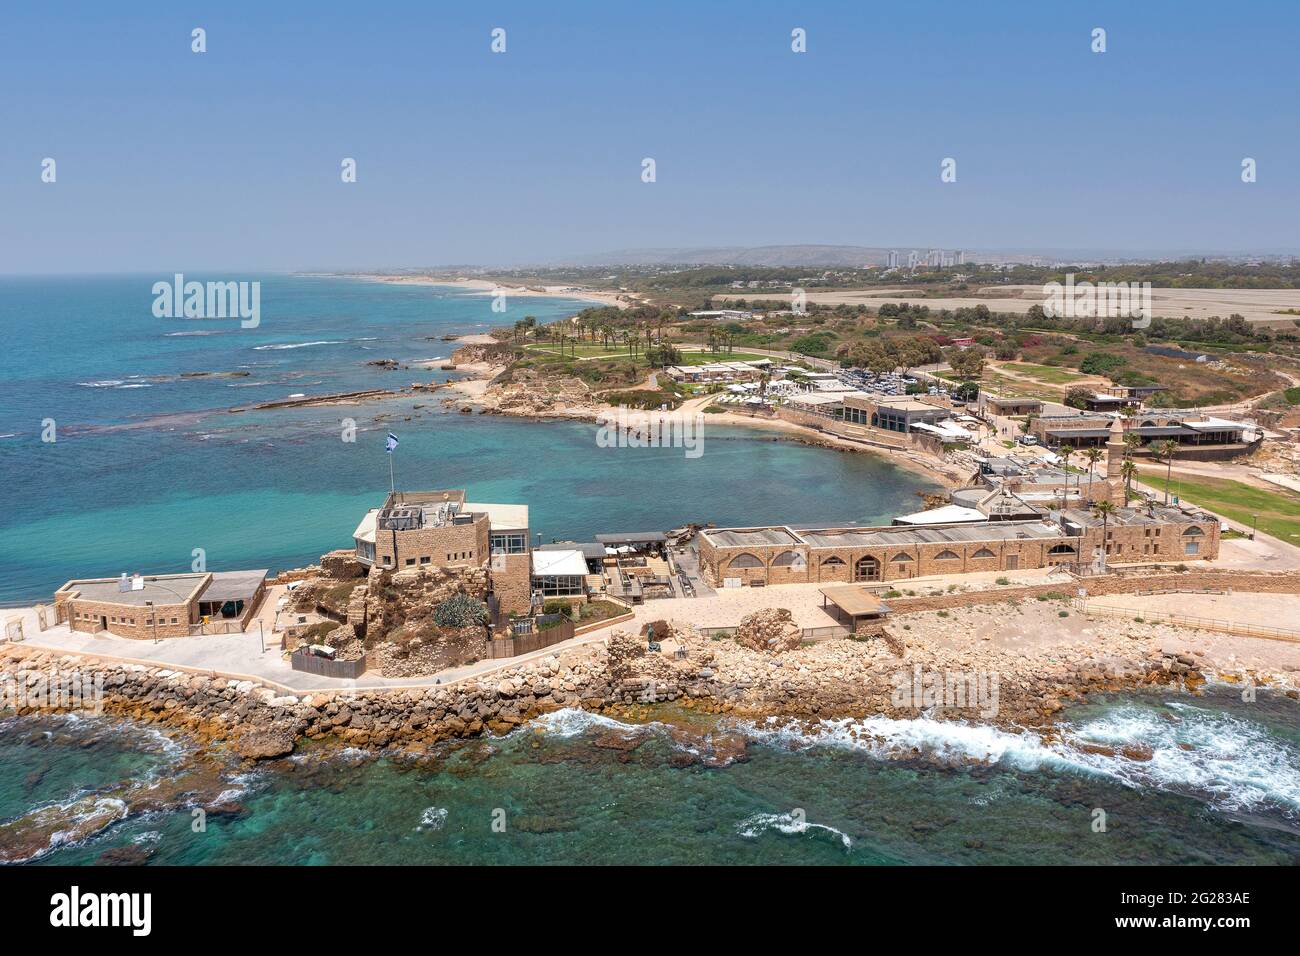 Caesarea ancient port, built by Herod the great, Aerial view. Stock Photo